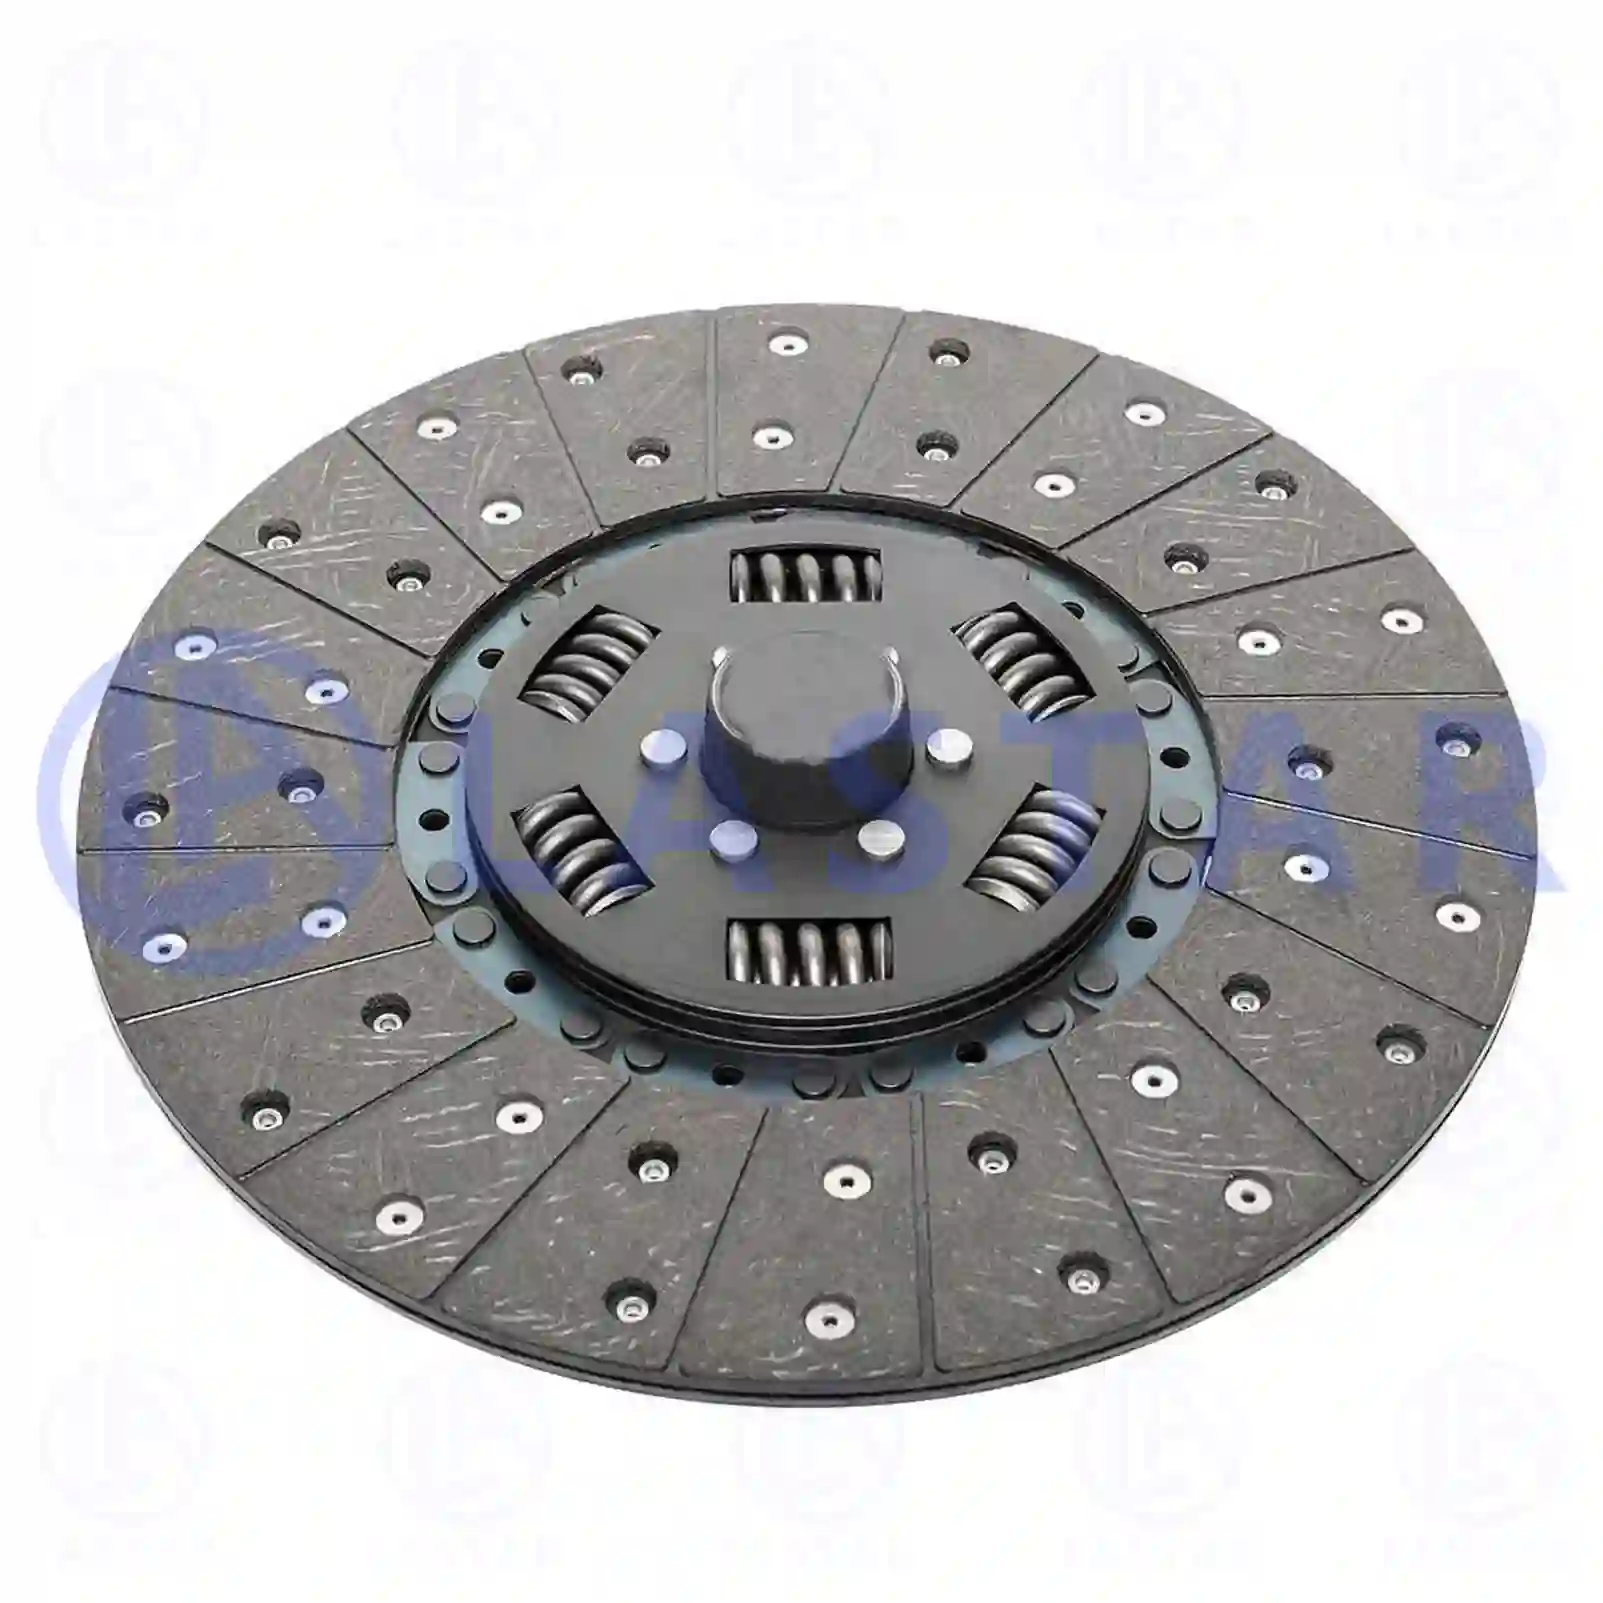 Clutch disc, 77722047, 0012505903, 0012506003, 0022500403, 0022503403, 0022503903, 0022508803, 0032508203, 0032508303, 0032508603, 0042504903, 0052500603, 0052500703, 0052509003, 0072502603, 0082507203, 0092501203, 009250120380, 0092501303, 009250130380, 0092506603, 0102508203, 0102508603, 0132508203, 0132509203, 013250920364, 3452502403, 3452507403, 3452507503, 8383156000, 8383275000, 040120264, 8383156000, 8383275000, 83832750000, 609F160001, 61000160005, 61000160902 ||  77722047 Lastar Spare Part | Truck Spare Parts, Auotomotive Spare Parts Clutch disc, 77722047, 0012505903, 0012506003, 0022500403, 0022503403, 0022503903, 0022508803, 0032508203, 0032508303, 0032508603, 0042504903, 0052500603, 0052500703, 0052509003, 0072502603, 0082507203, 0092501203, 009250120380, 0092501303, 009250130380, 0092506603, 0102508203, 0102508603, 0132508203, 0132509203, 013250920364, 3452502403, 3452507403, 3452507503, 8383156000, 8383275000, 040120264, 8383156000, 8383275000, 83832750000, 609F160001, 61000160005, 61000160902 ||  77722047 Lastar Spare Part | Truck Spare Parts, Auotomotive Spare Parts